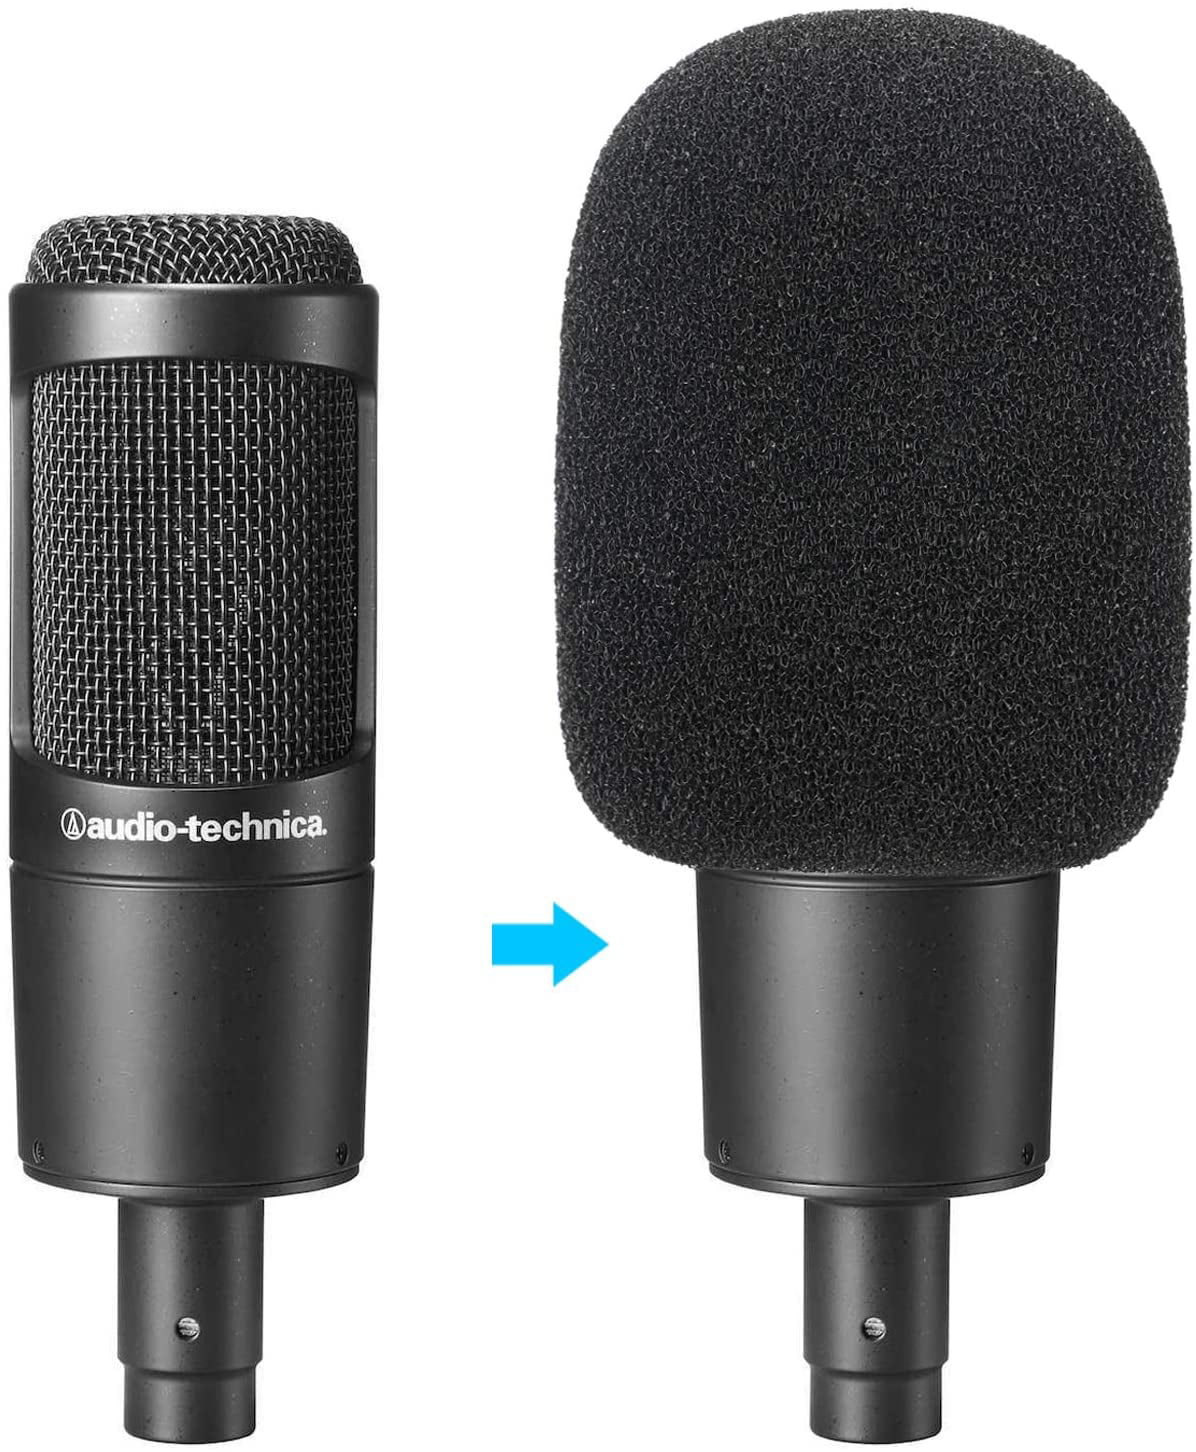 AT2035 Pop Filter Foam Cover Windscreen Mic Wind Cover Customized for Audio Technica AT2035 Condenser Microphone to Blocks Out Plosives